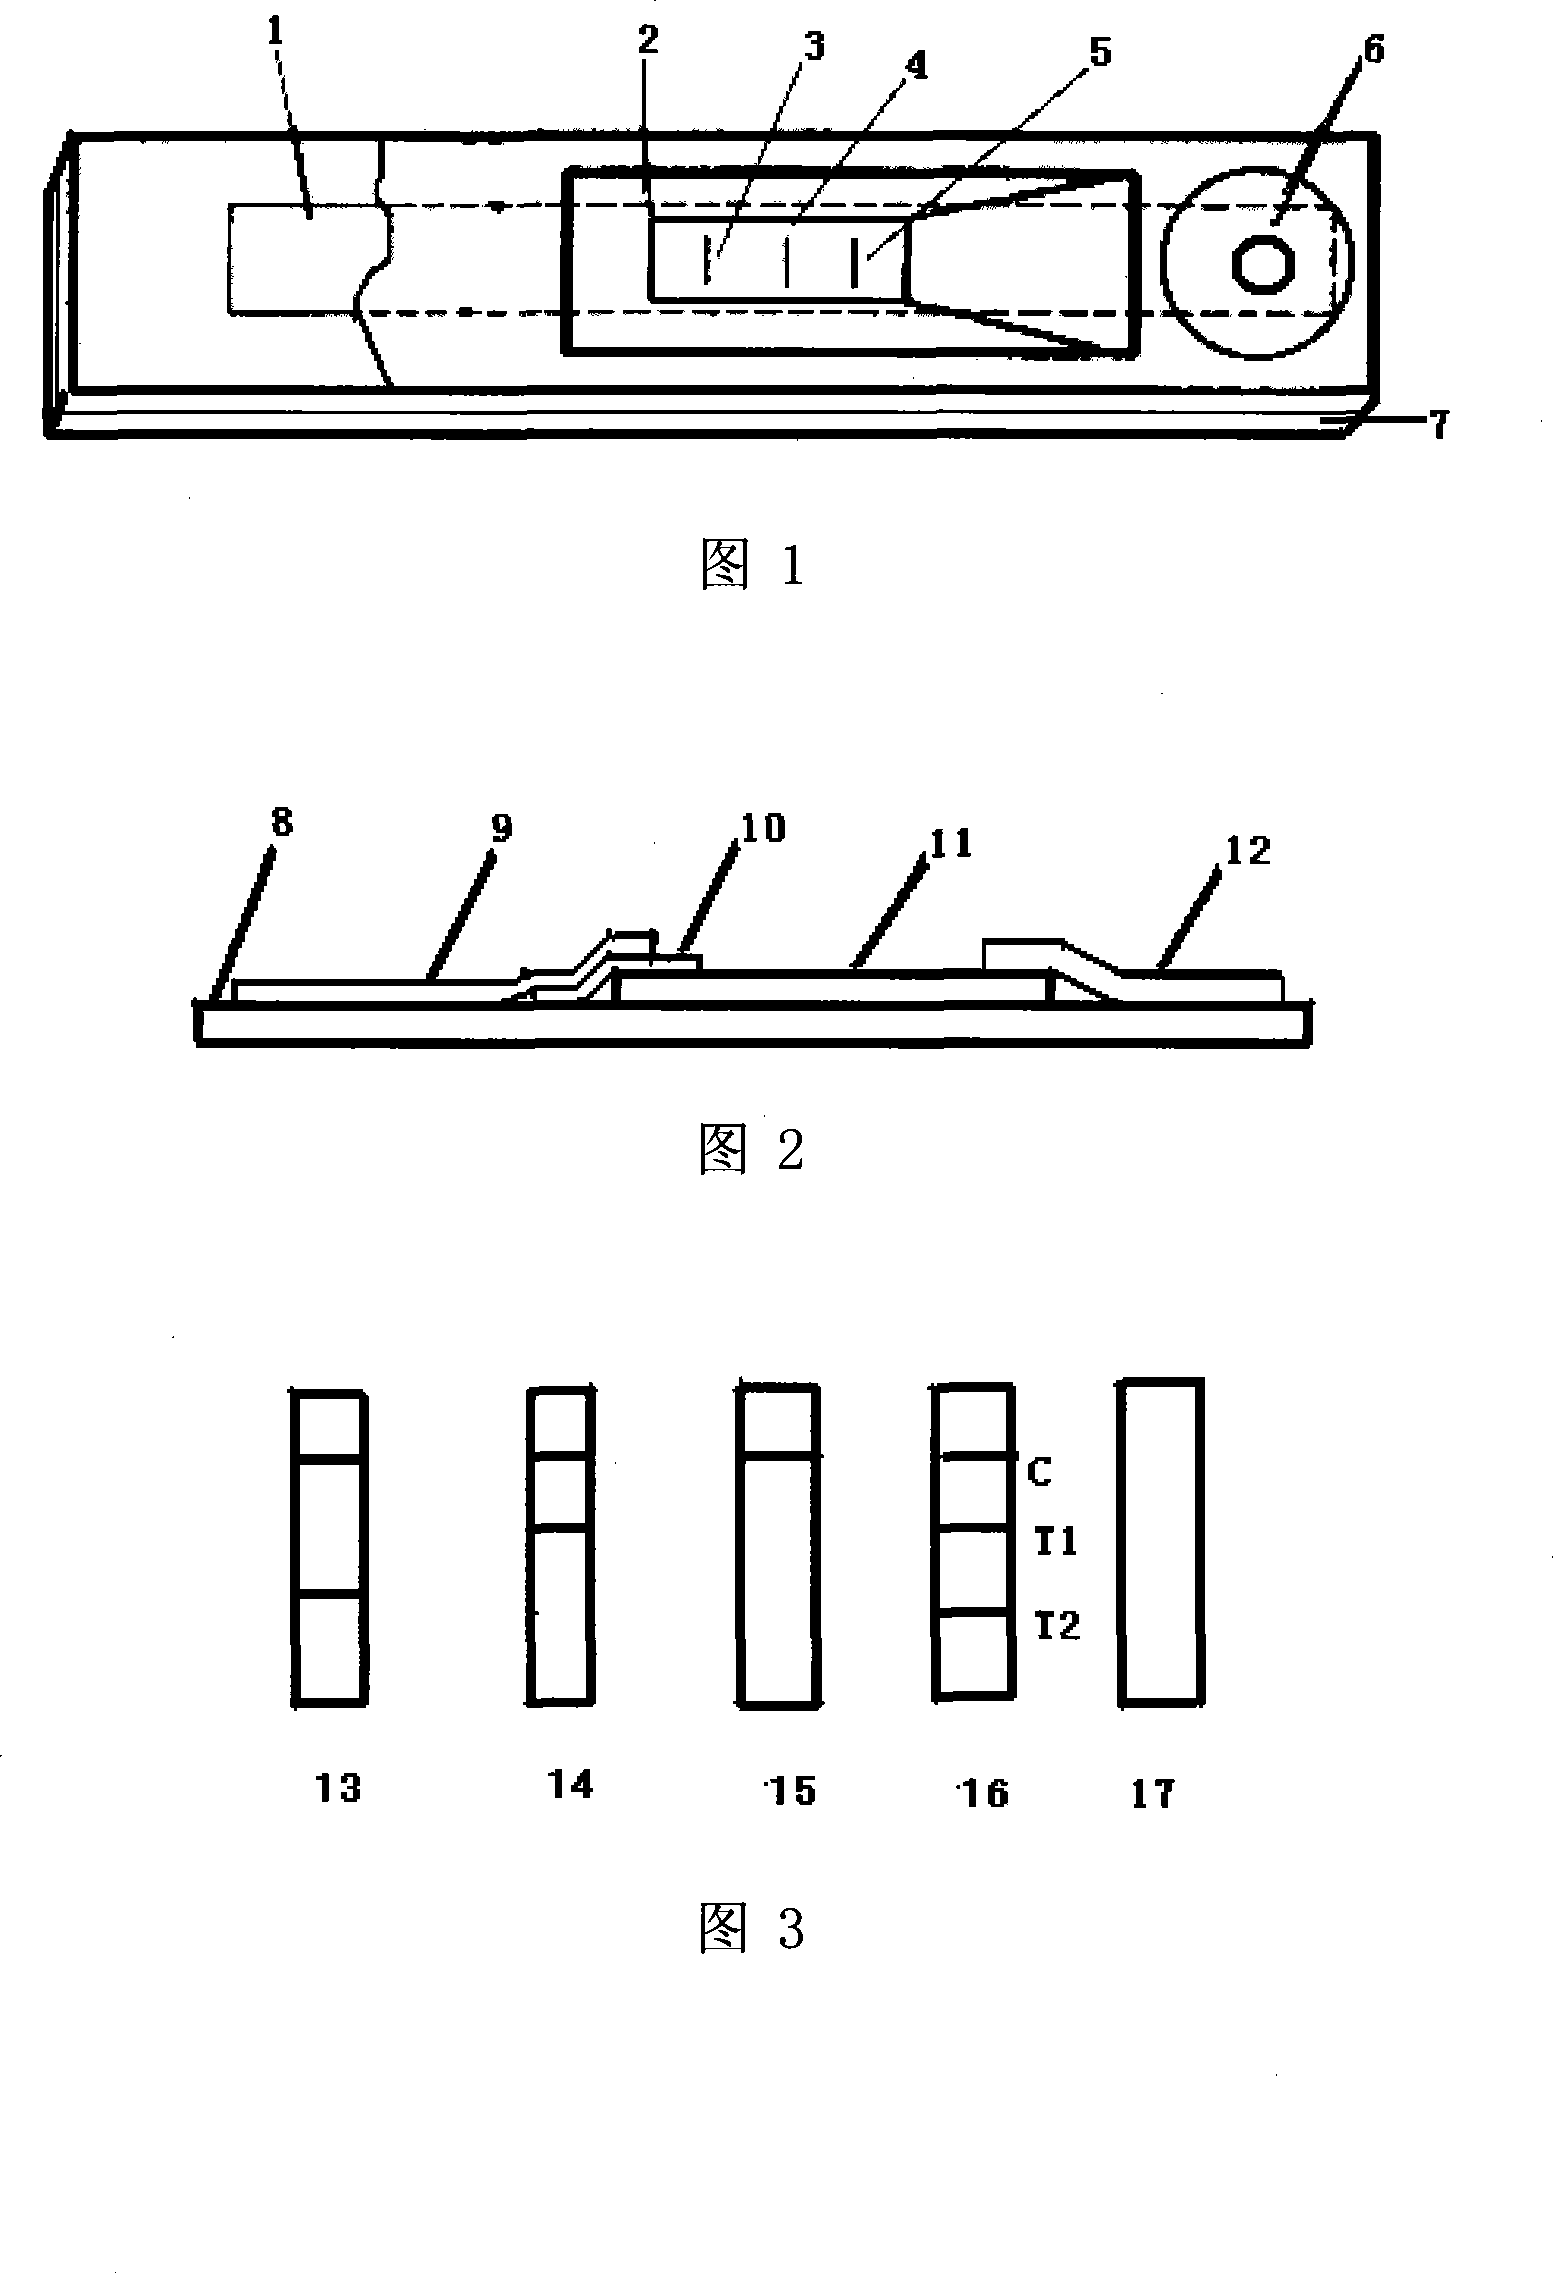 Chlorpromazine-diazepam dual detection card and its detection method